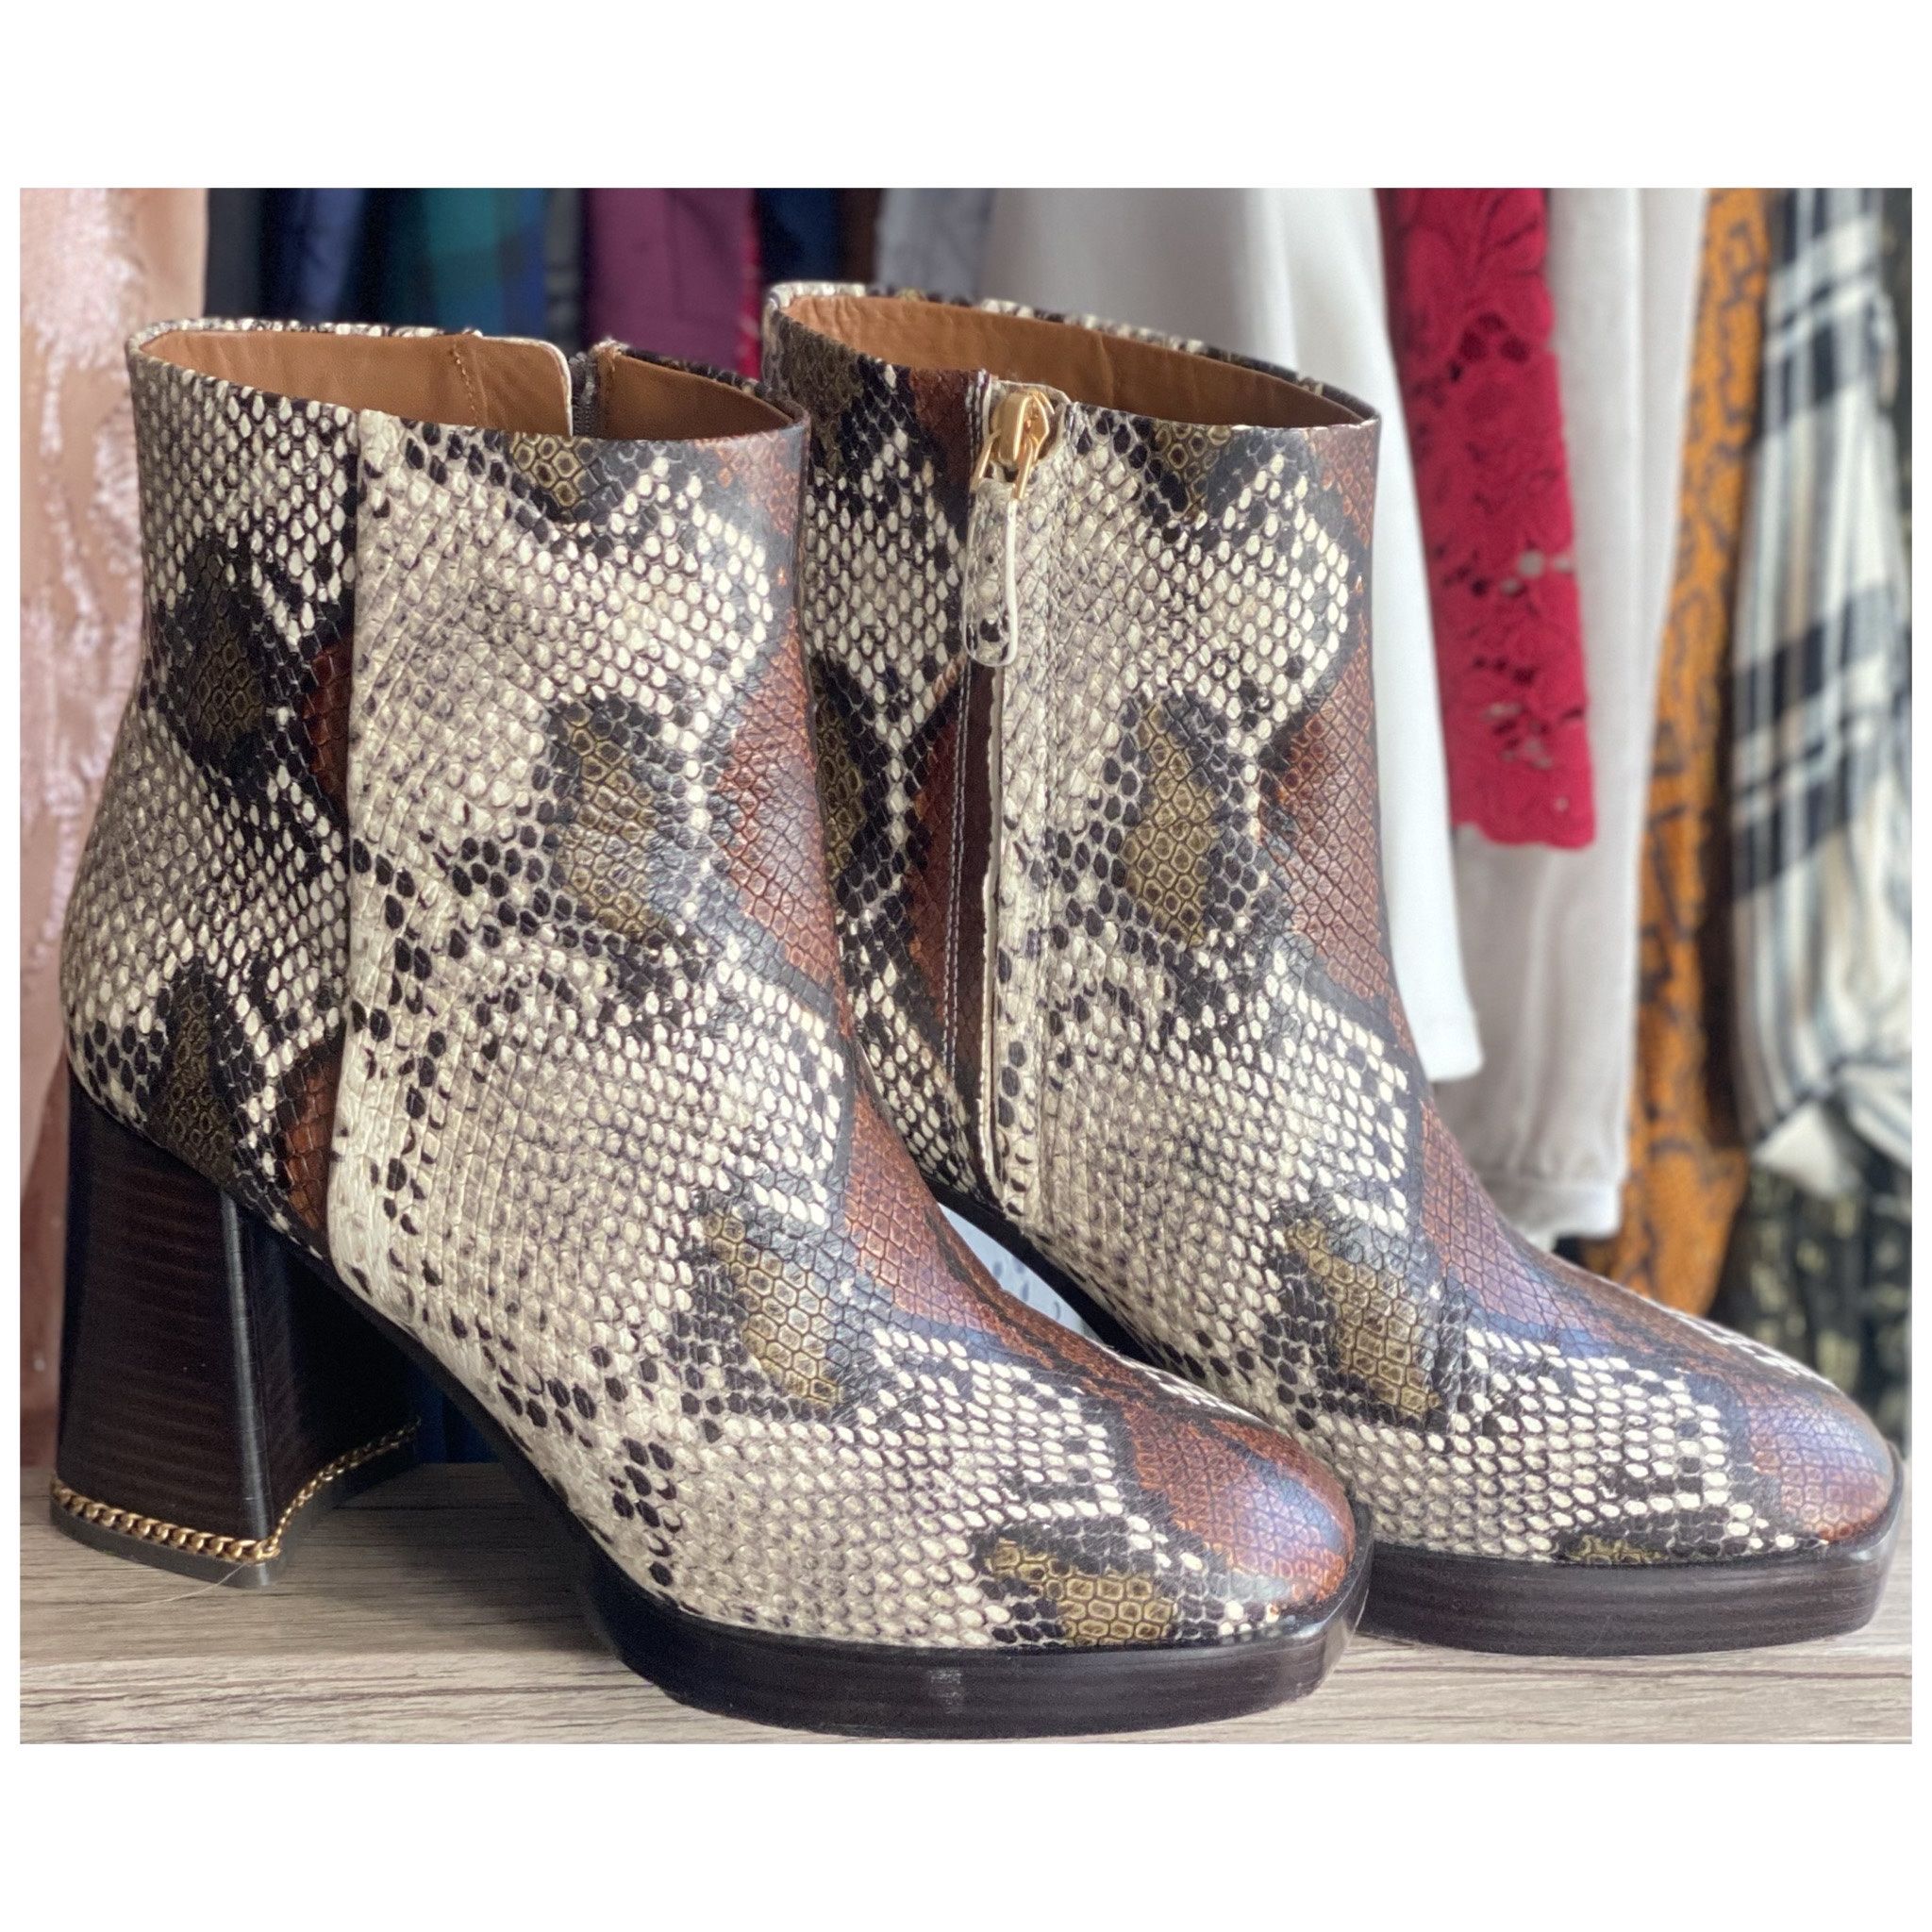 Tory Burch Snakeskin Boots  for Sale in Chevy Chase, MD - OfferUp